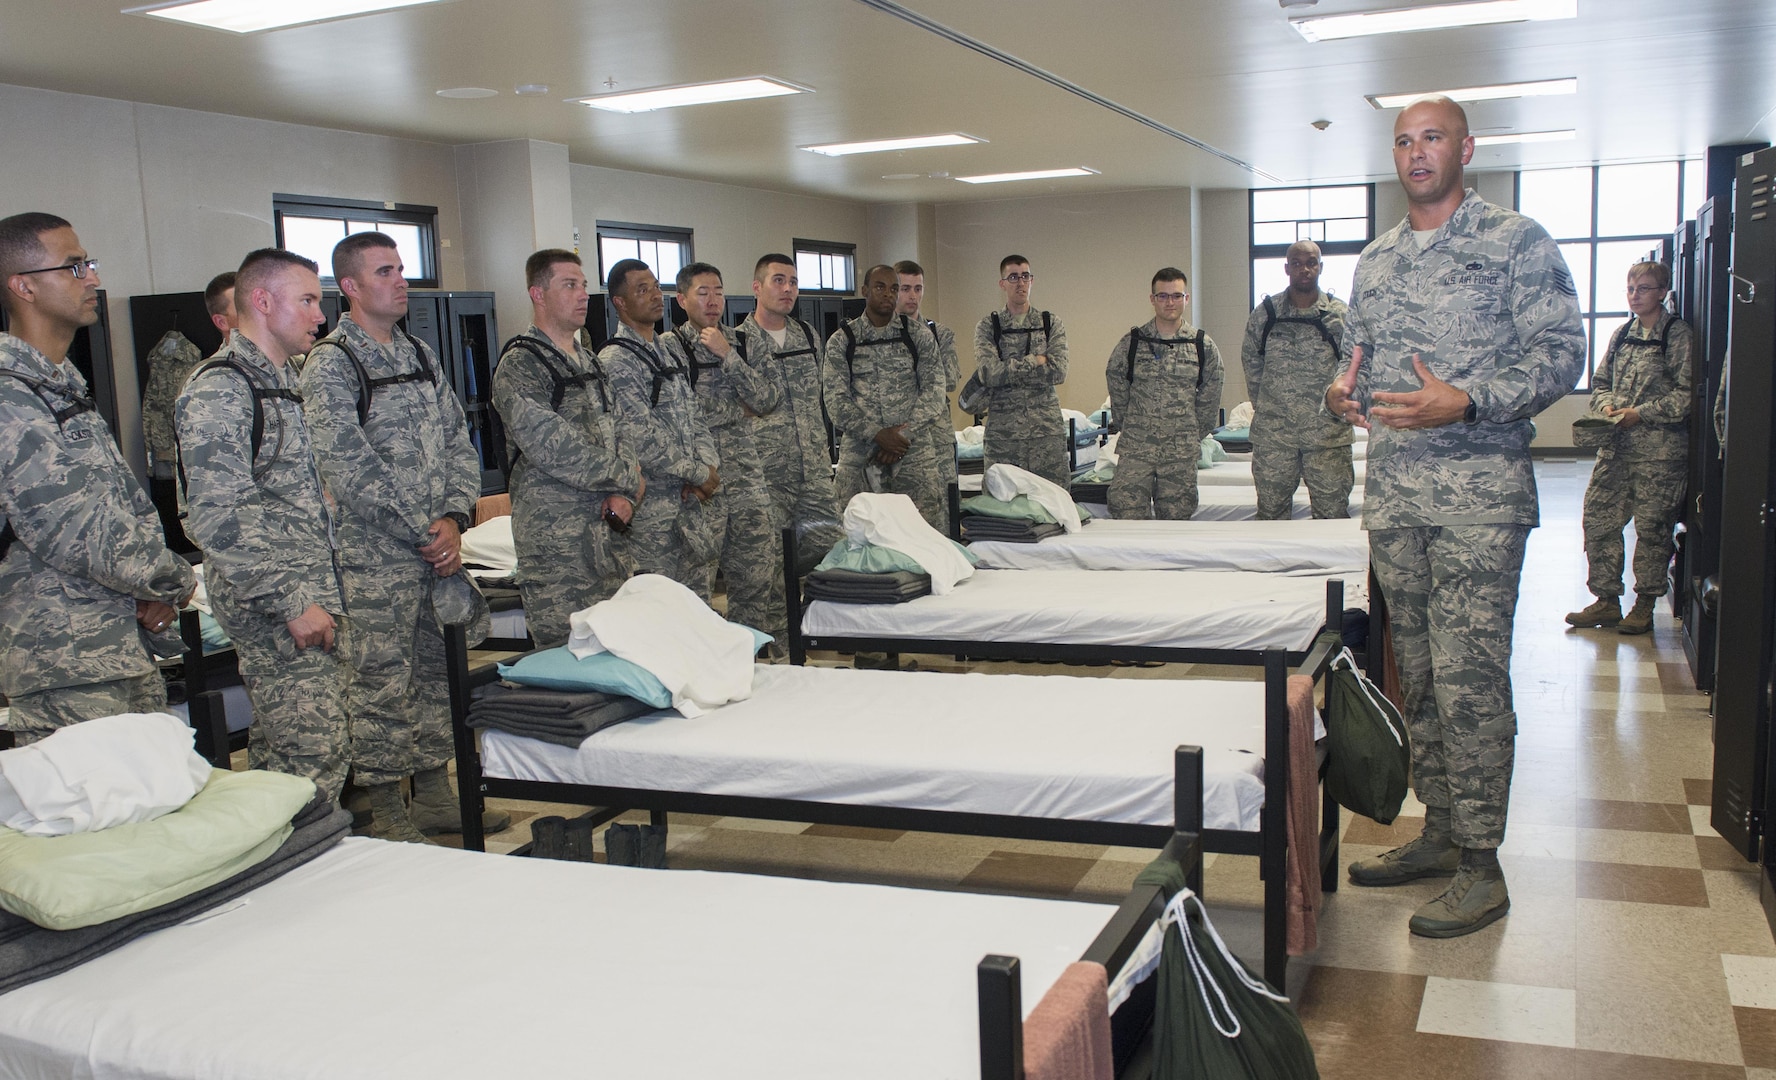 Tech. Sgt. Paul Couch, 323rd Training Squadron military training instructor, provides a tour to chaplain candidates of an Airman Training Complex at Joint Base San Antonio-Lackland, Texas, July 5, 2017. The tour was part of the Chaplain Candidate Intensive Internship. (U.S. Air Force photo by Senior Airman Krystal Wright)